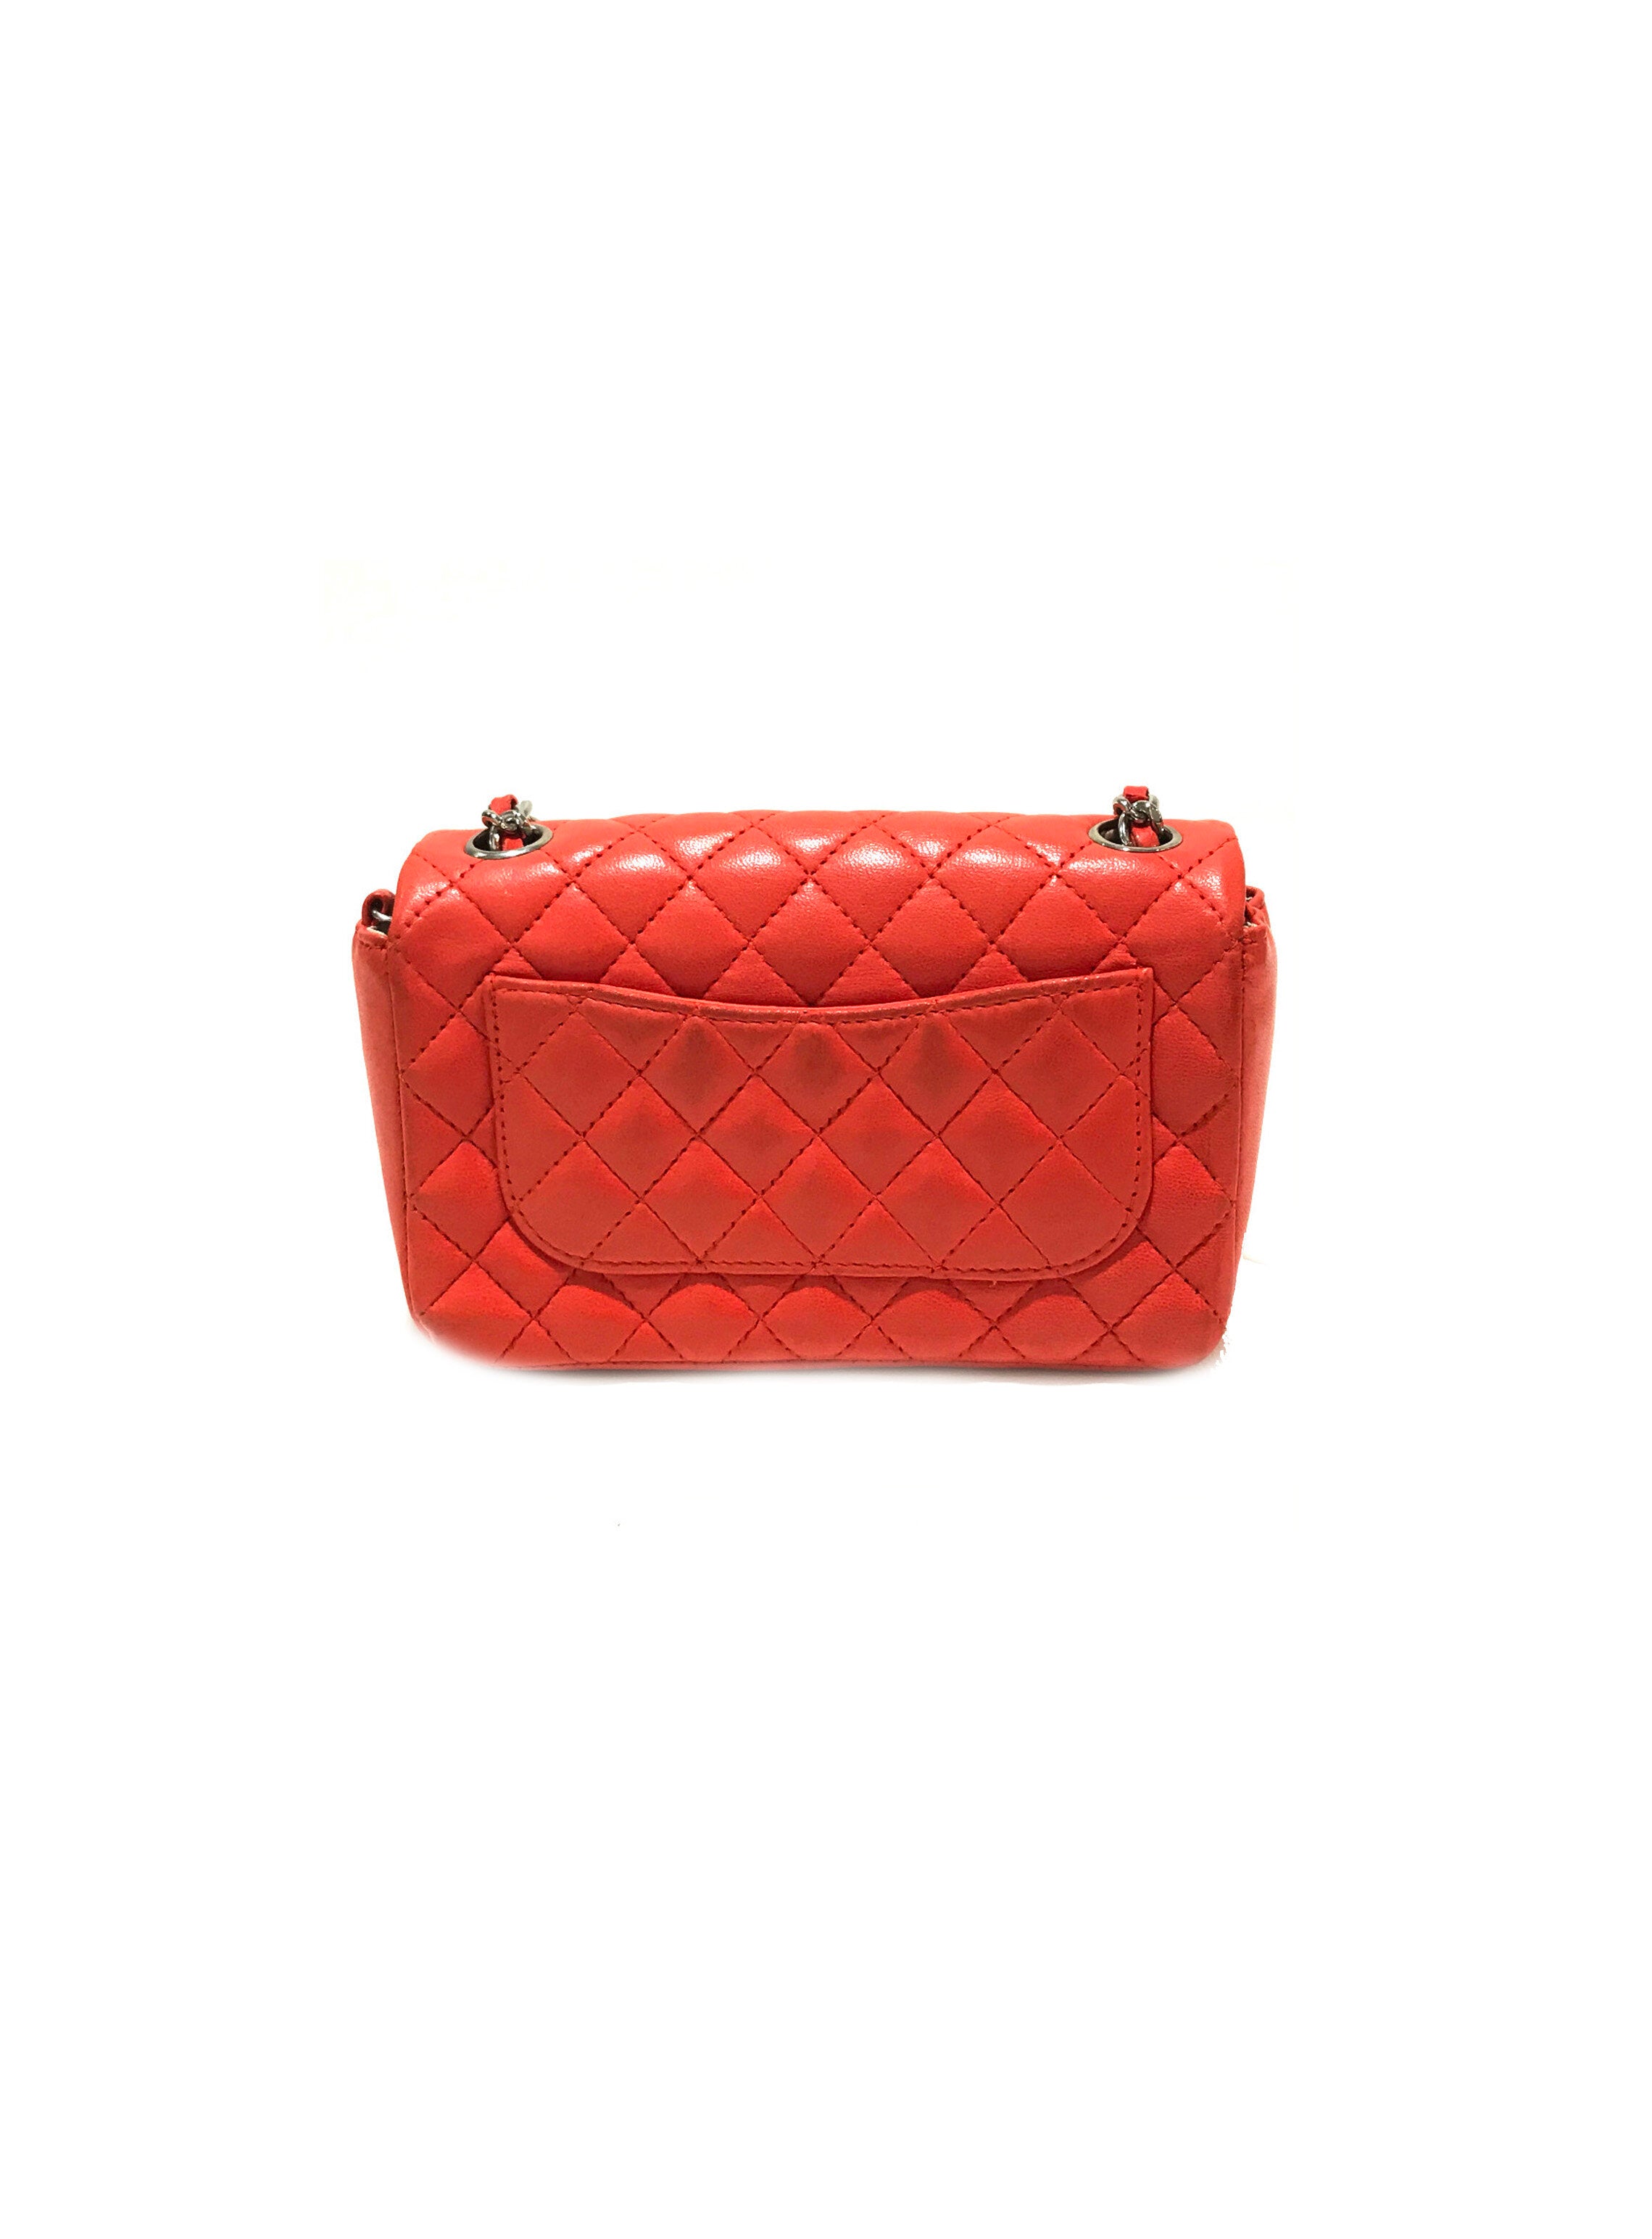 Chanel Limited Edition Single Flap bag in red leather - Second